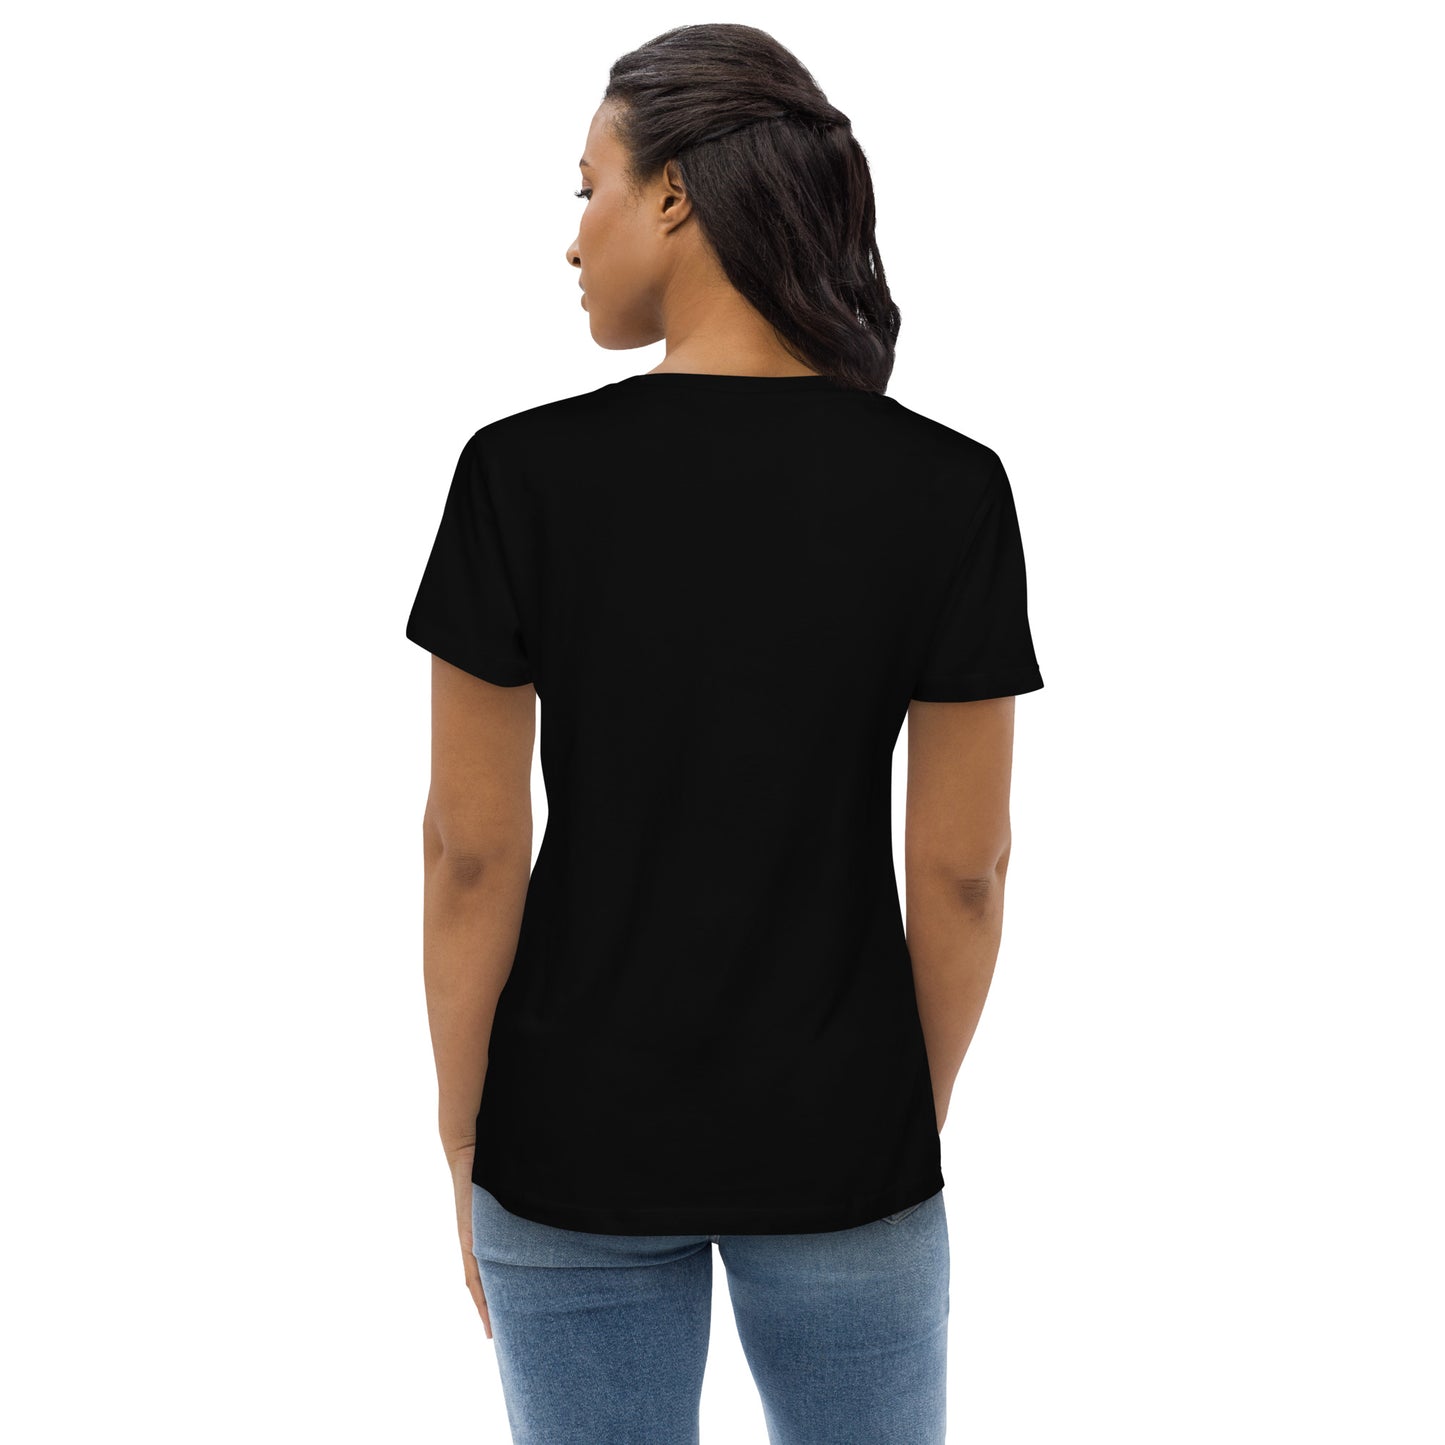 YOU ARE NOT ALONE Women's Tee